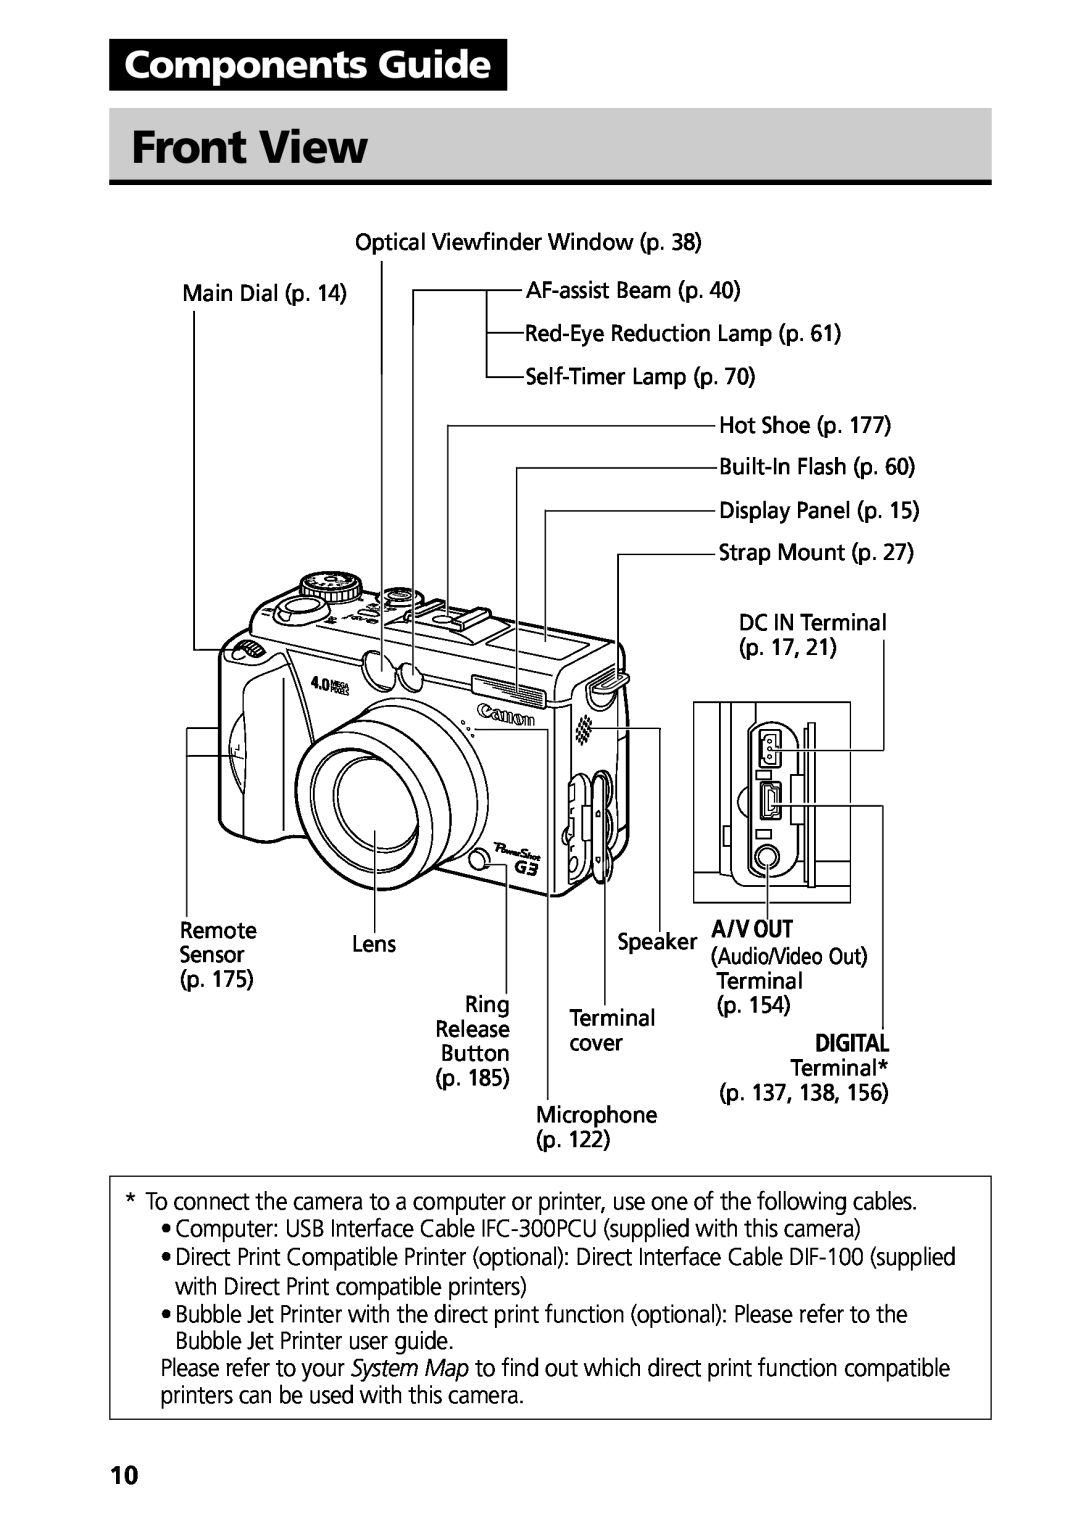 Canon G3 manual Front View, Components Guide 